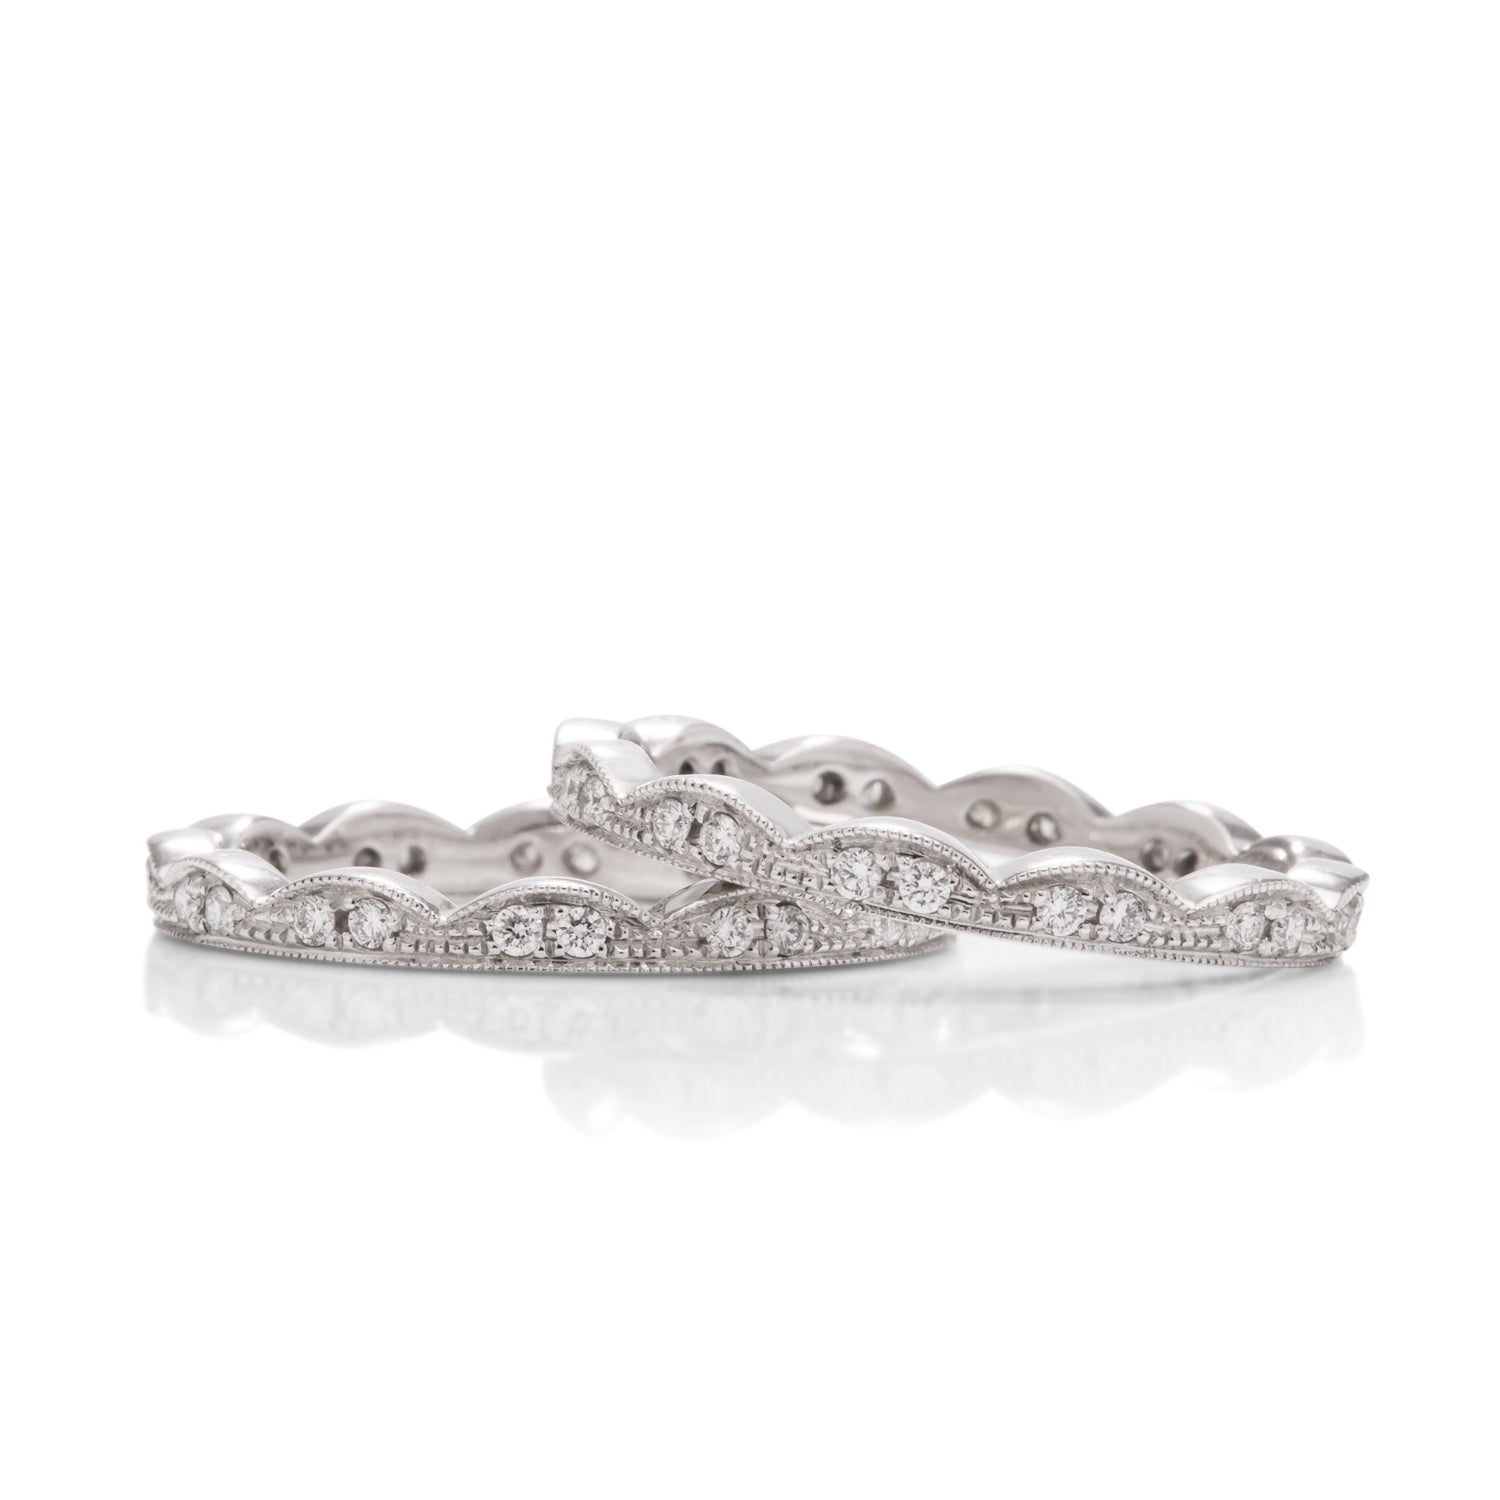 Pair of 18k White Gold Stackable Diamond Rings - Charles Koll Jewellers